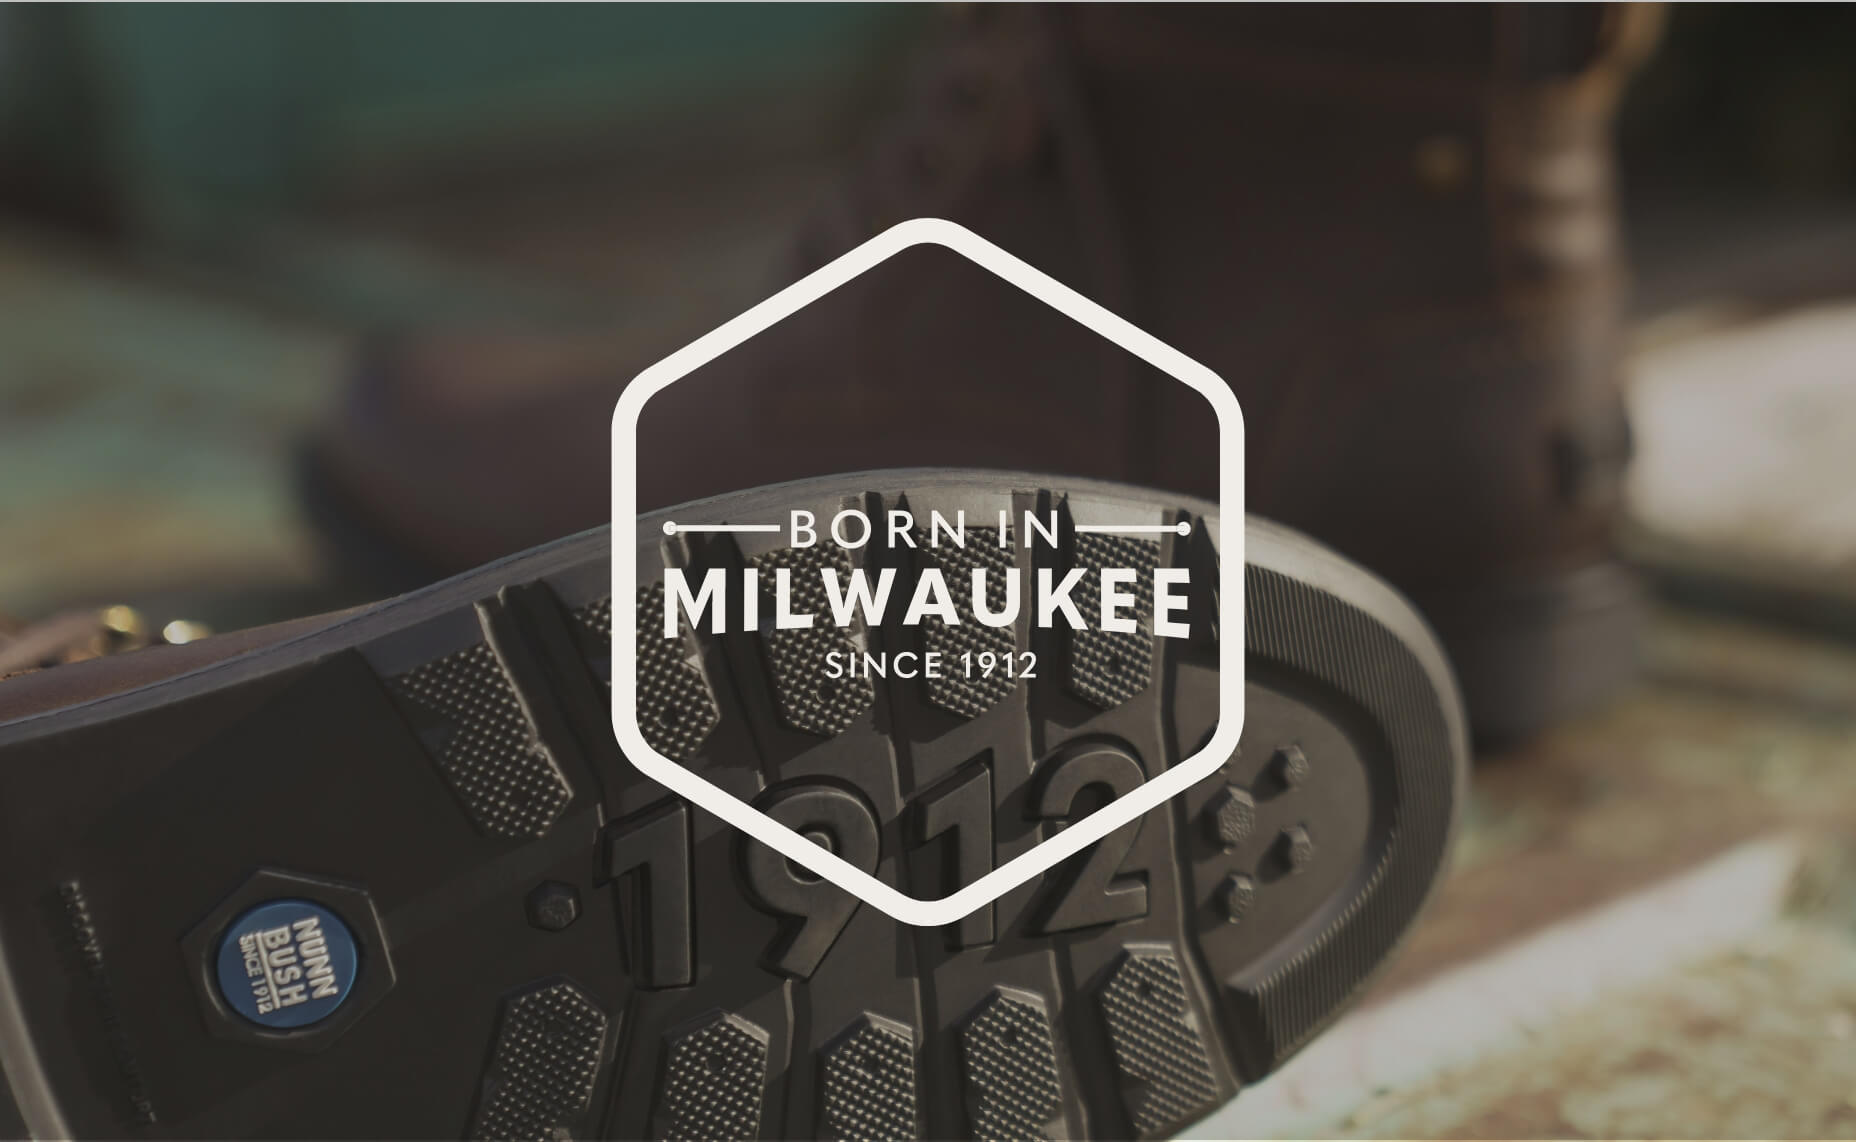 Milwaukee… where Nunn Bush was created. Click to learn about the history of our company, our mission, and our shoe-making process.